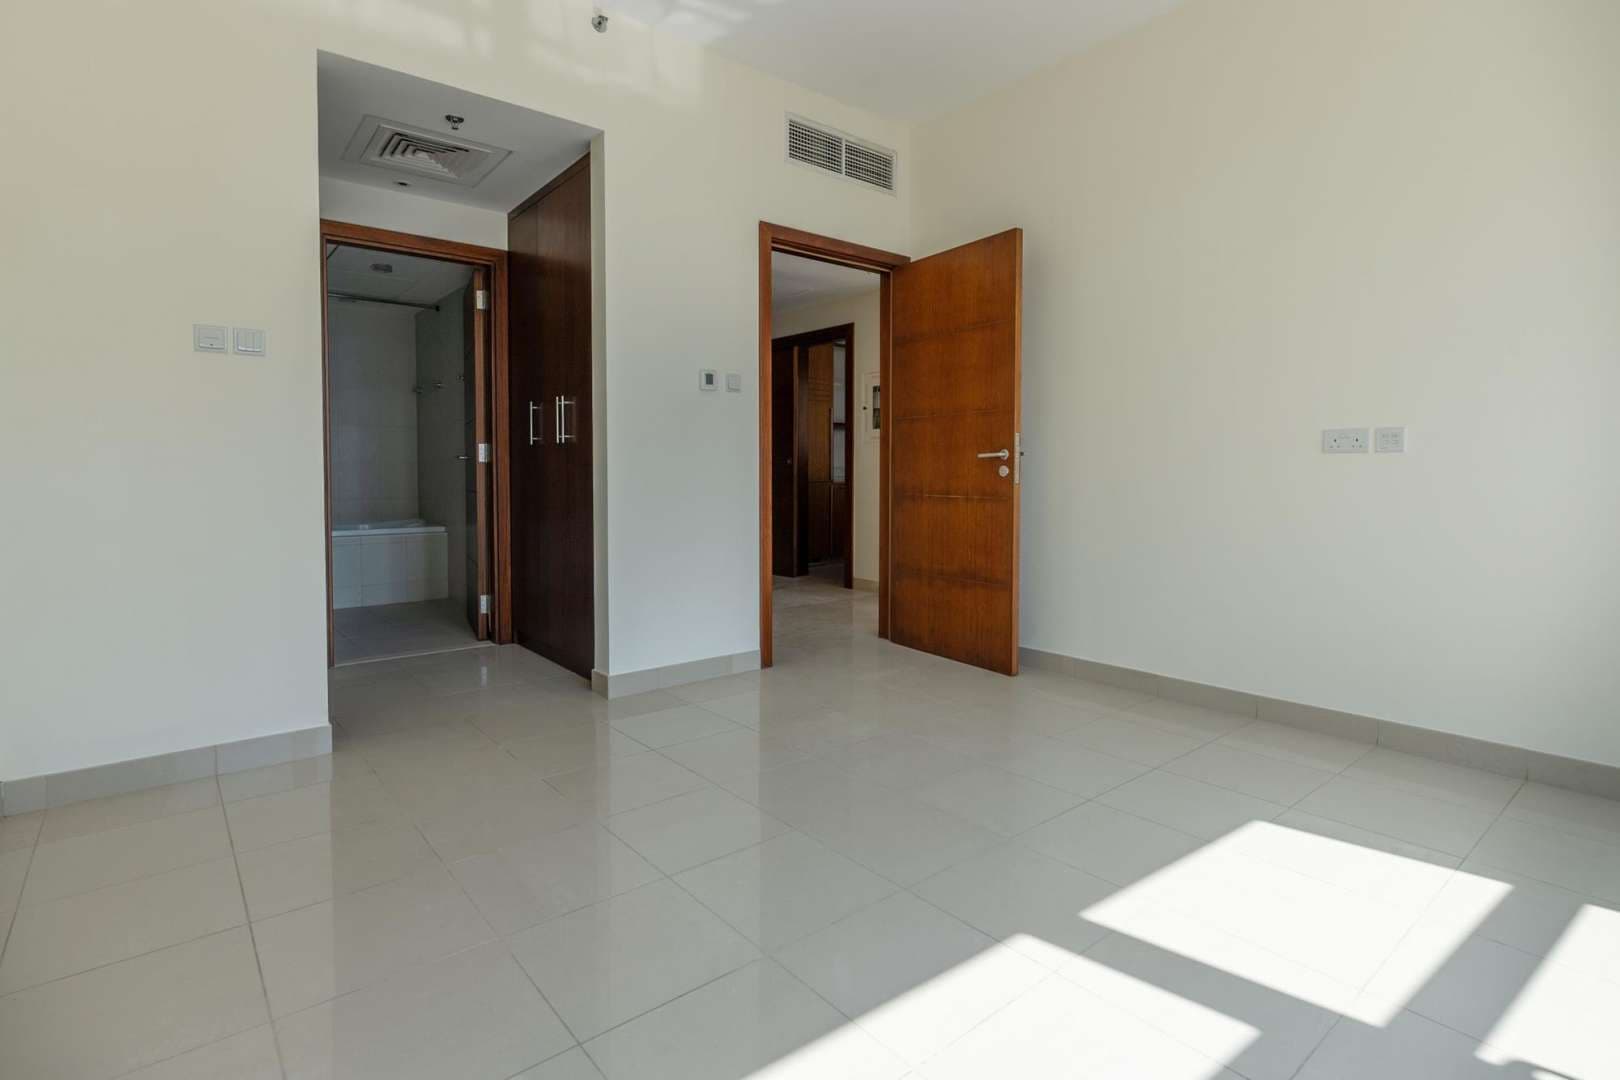 1 Bedroom Apartment For Rent Standpoint Tower A Lp05154 1087fbc11c2e1200.jpg